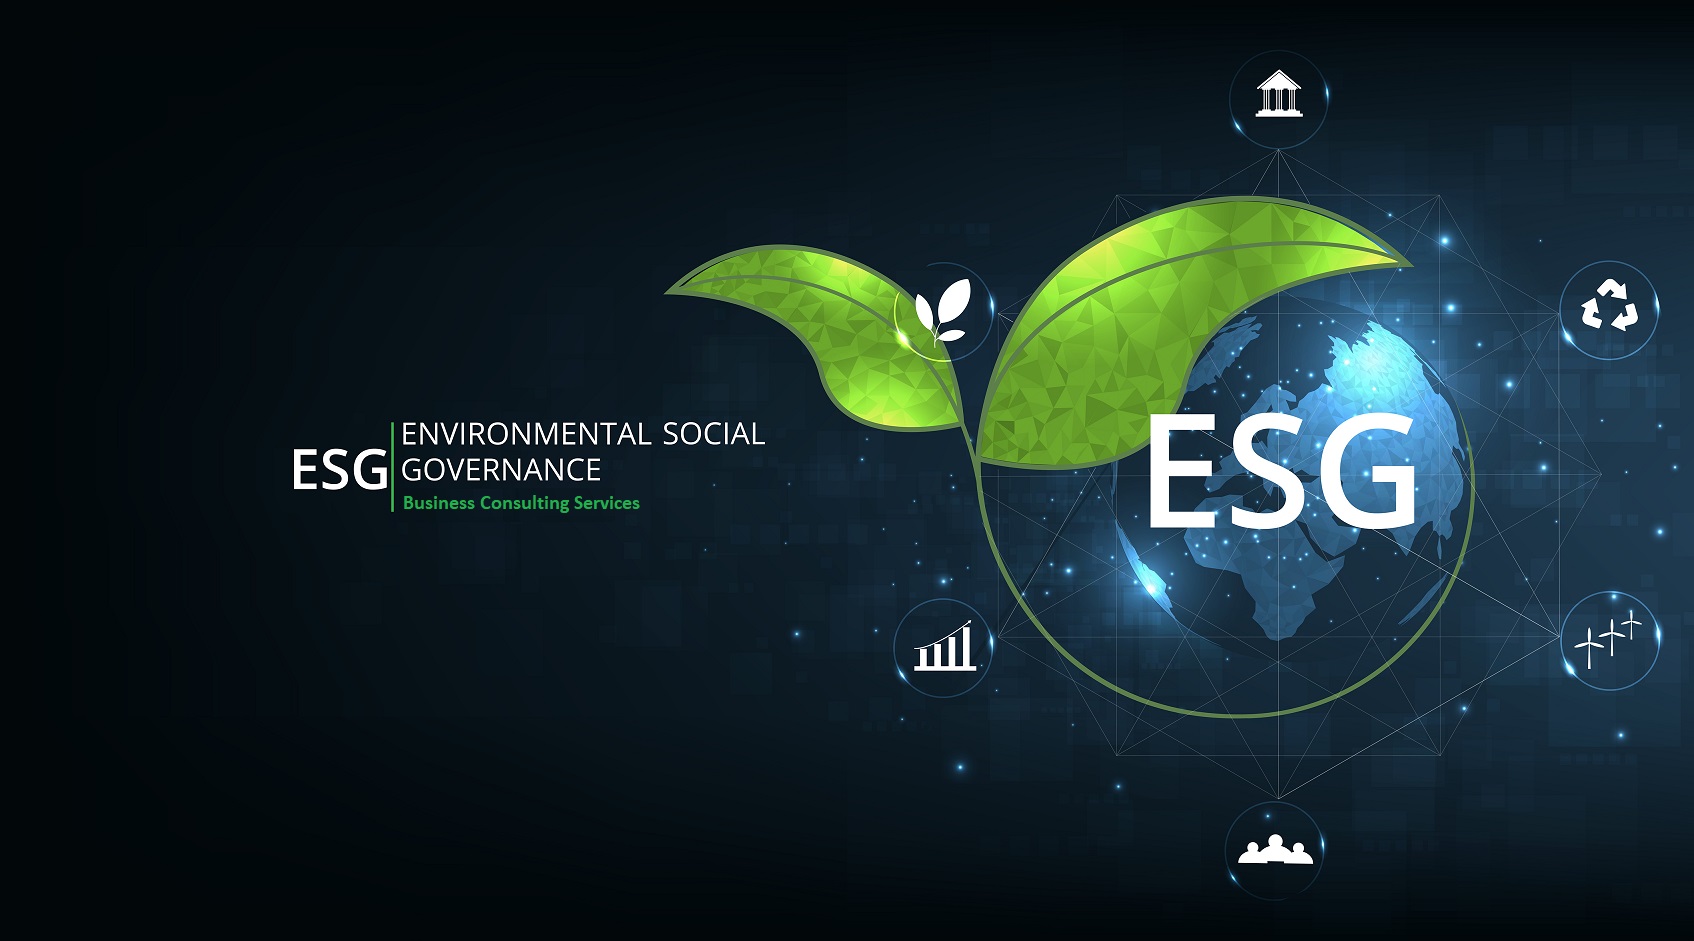 ESG Description
Environment-Climate Stability, Waste Management, and Natural Resources
Social-Diversity, Human Capital Management, and Health & Safety
Governance-Risk Management, transparency, and Antibribery & Corruption